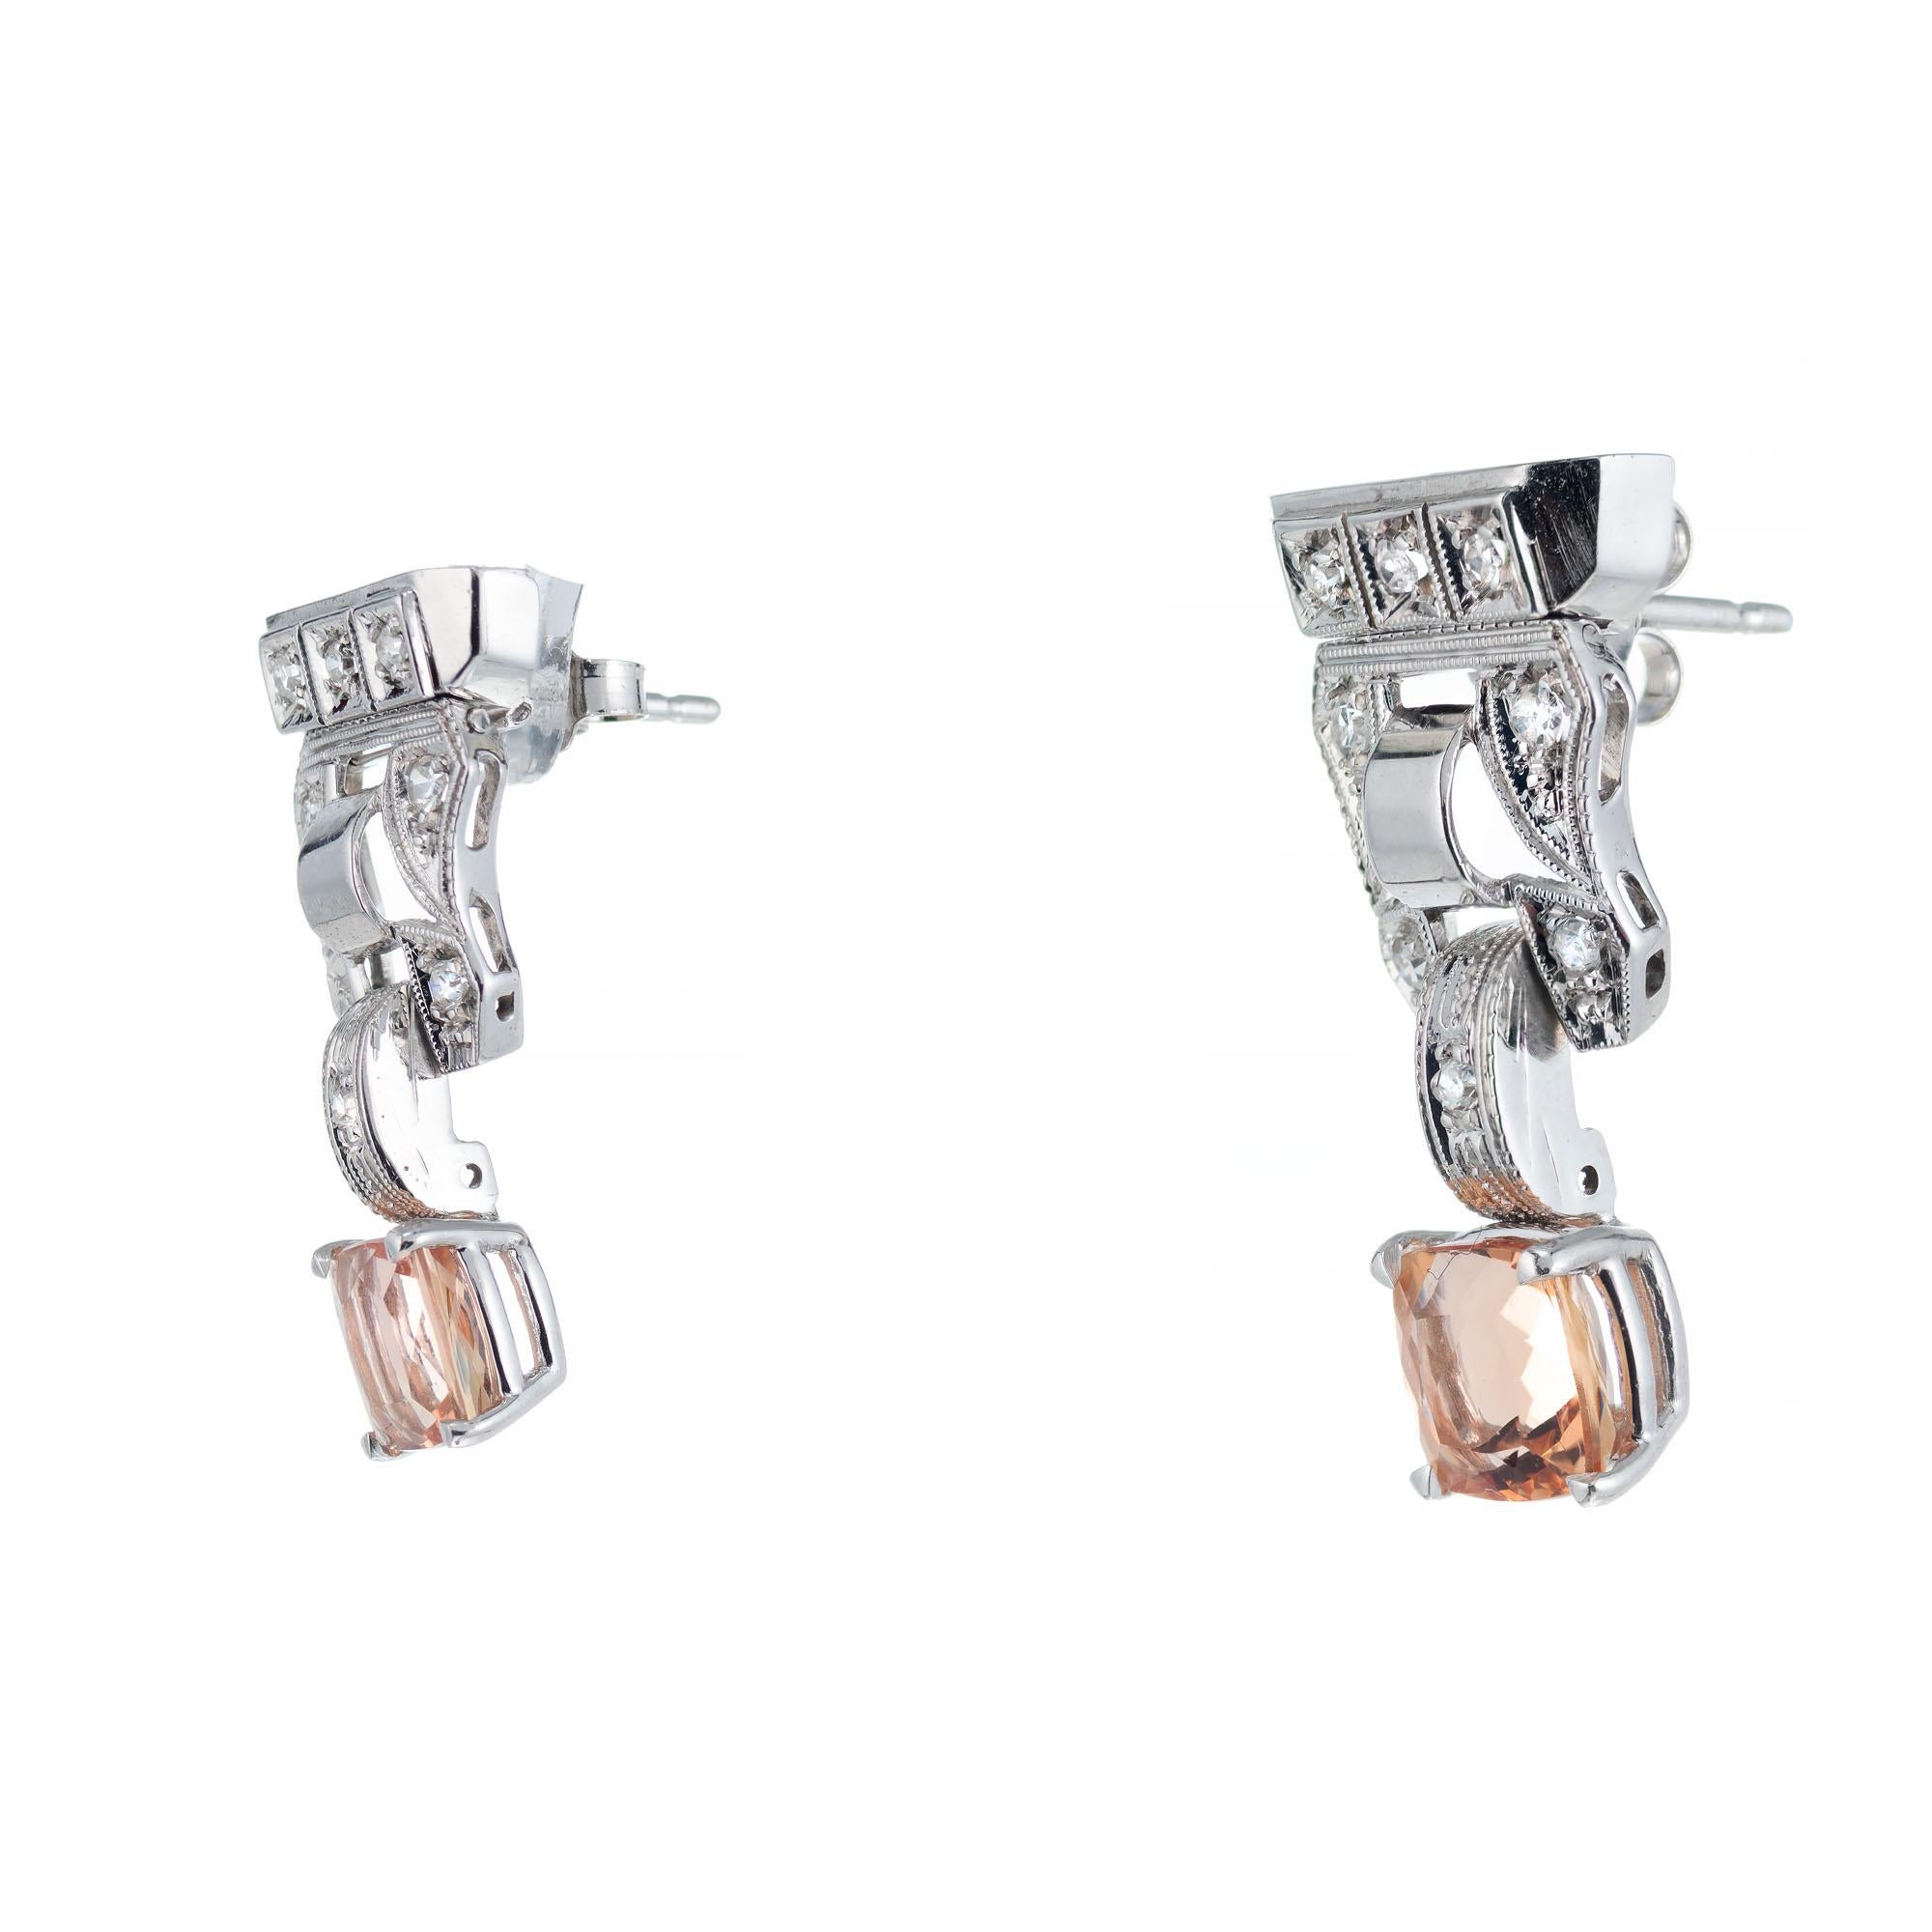 Untreated pink orange precious cushion cut pink Topaz dangle earrings set in 14k white gold with 16 single cut accent diamonds. 

2 pink cushion cut precious Topaz, approx. total weight 2.86cts, VS, 6.2 x 6.2mm, natural and untreated
16 single cut